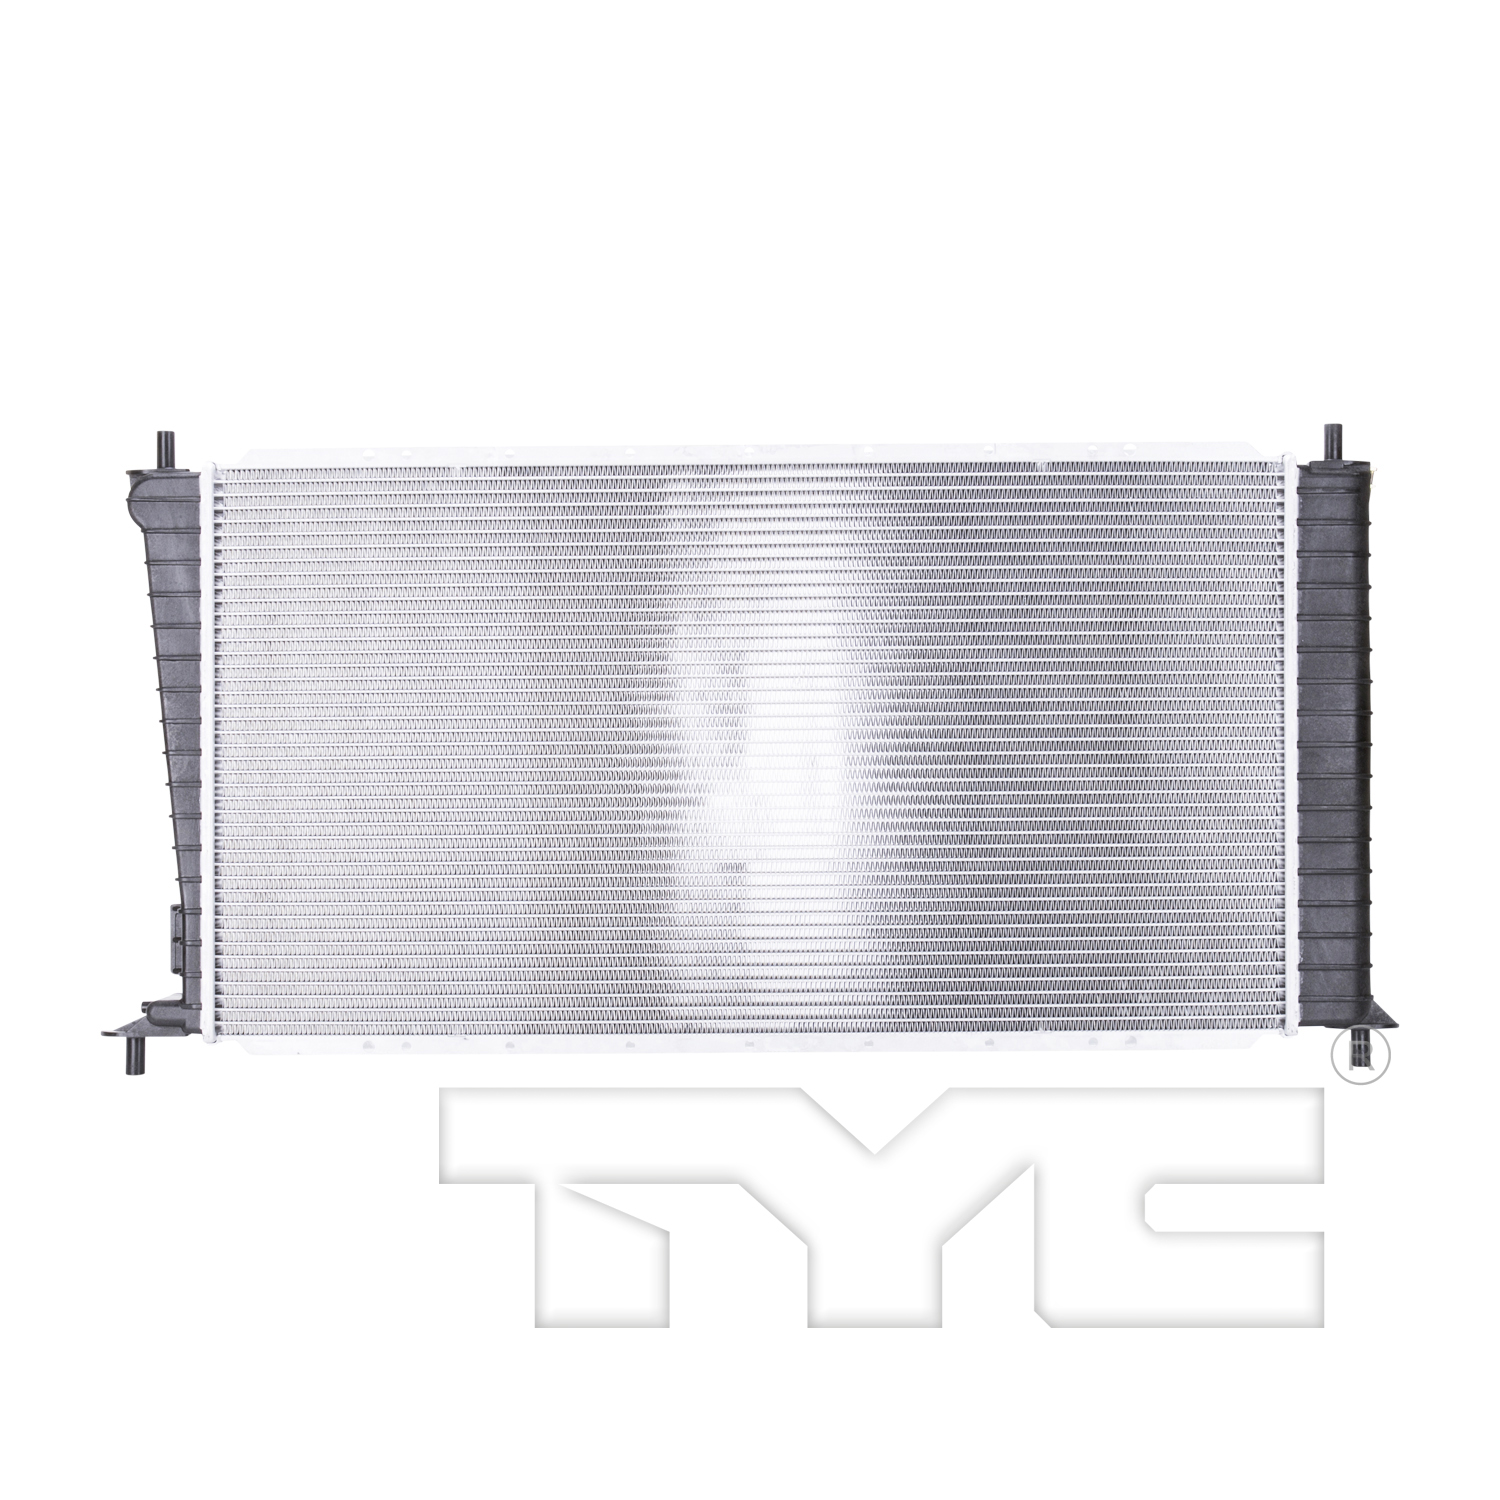 Aftermarket RADIATORS for FORD - EXPEDITION, EXPEDITION,97-97,Radiator assembly